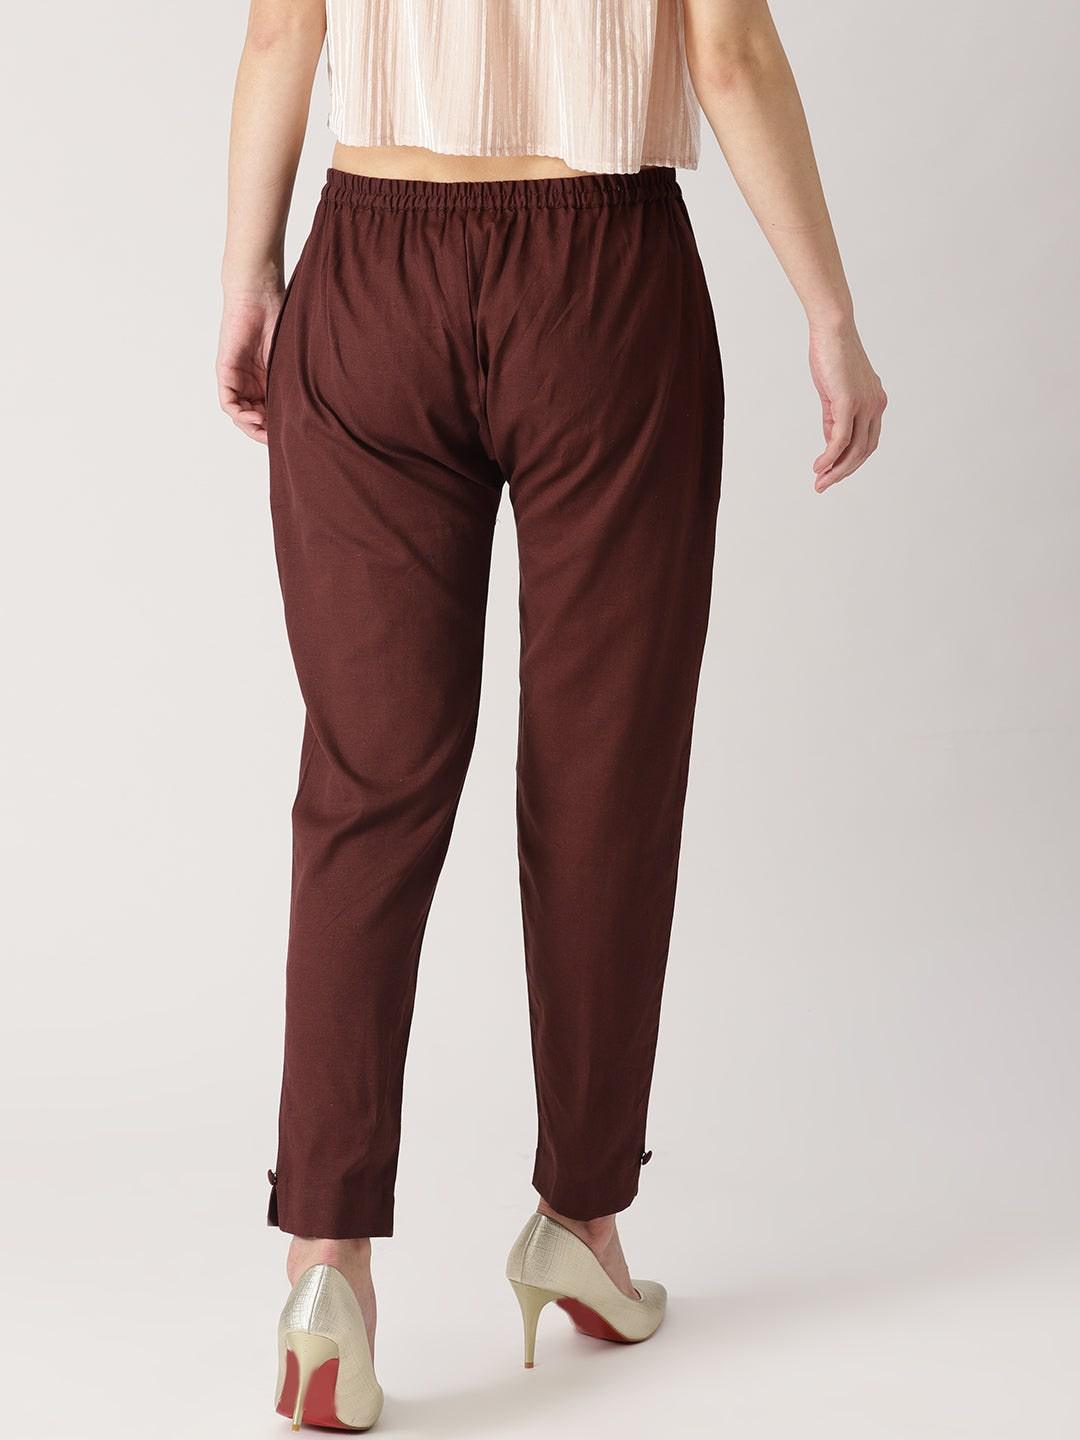 Brown Solid Cotton Trousers - Libas